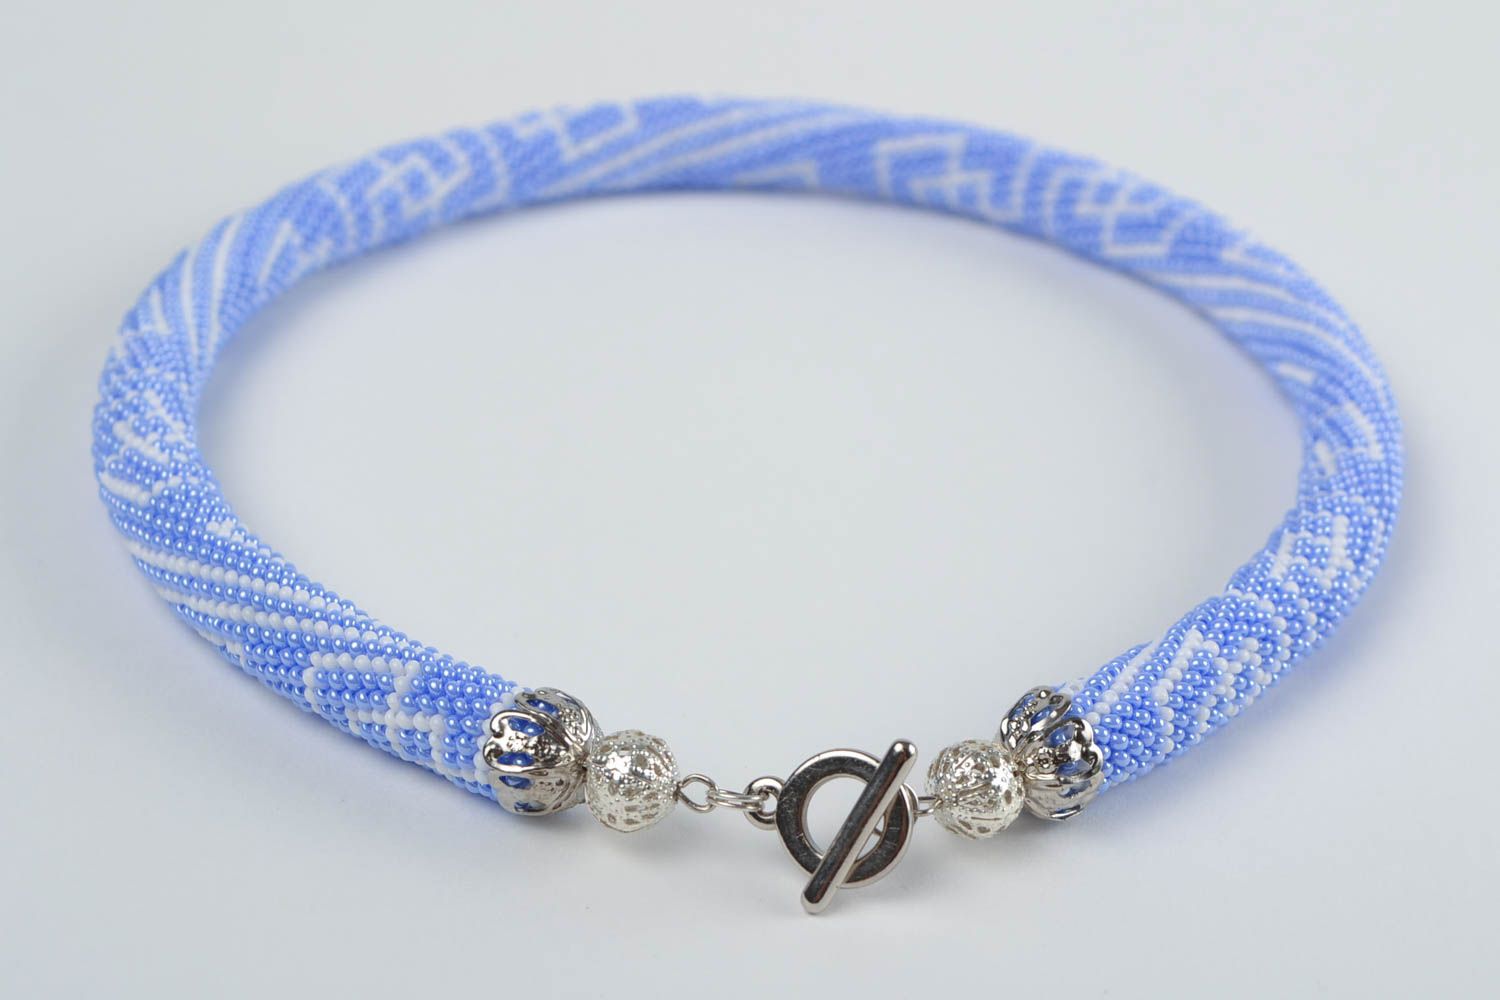 Handmade woven blue beautiful stylish beaded cord necklace with white ornaments photo 5